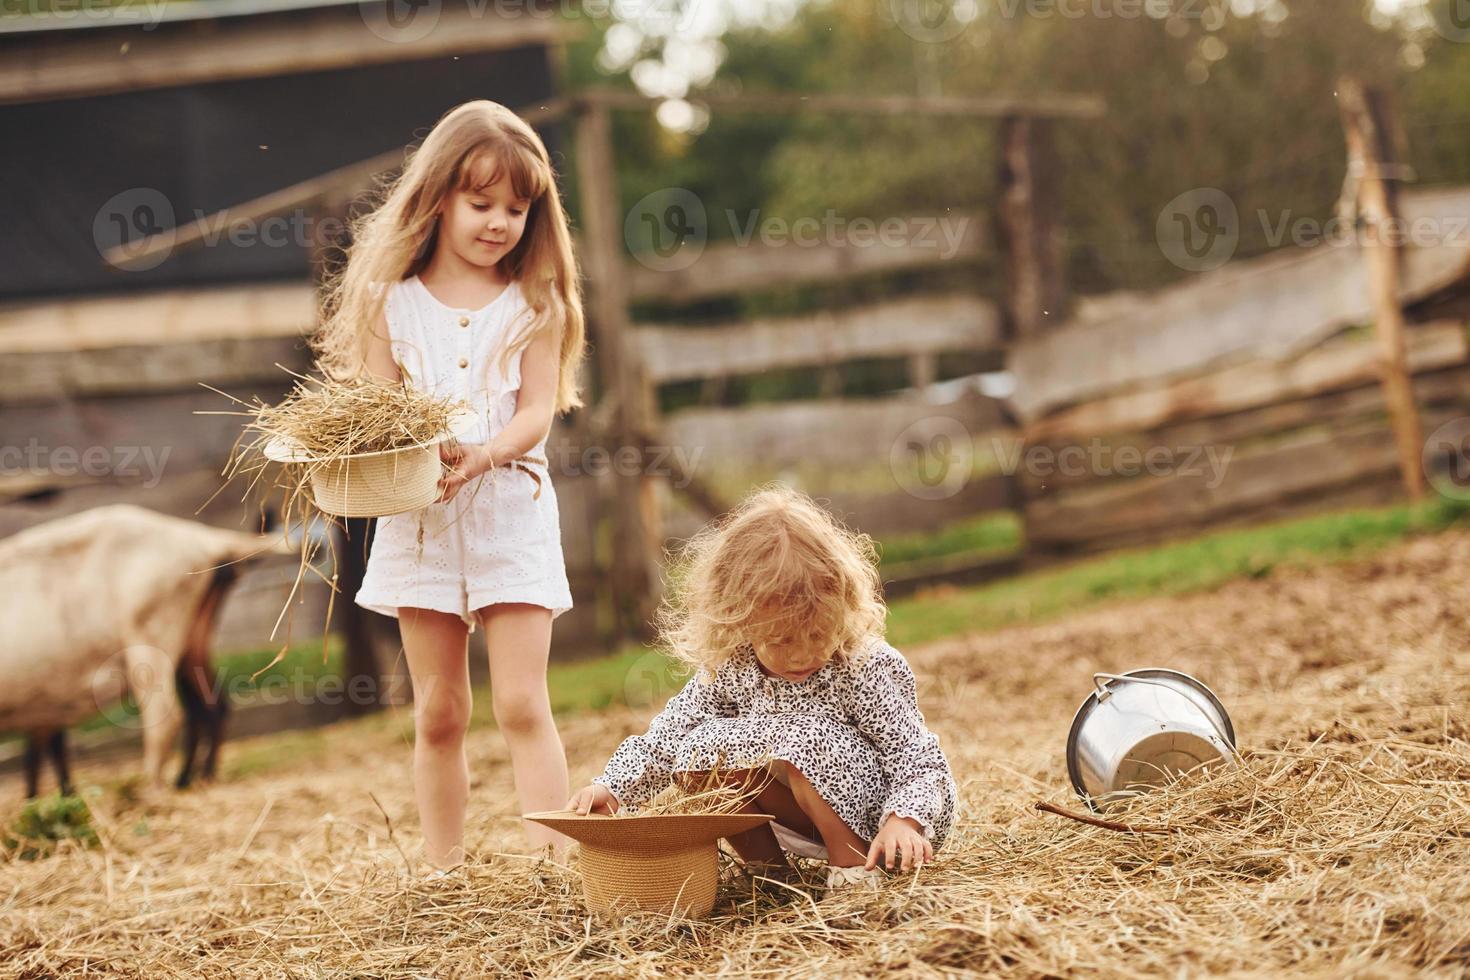 Two little girls together on the farm at summertime having weekend with goats photo